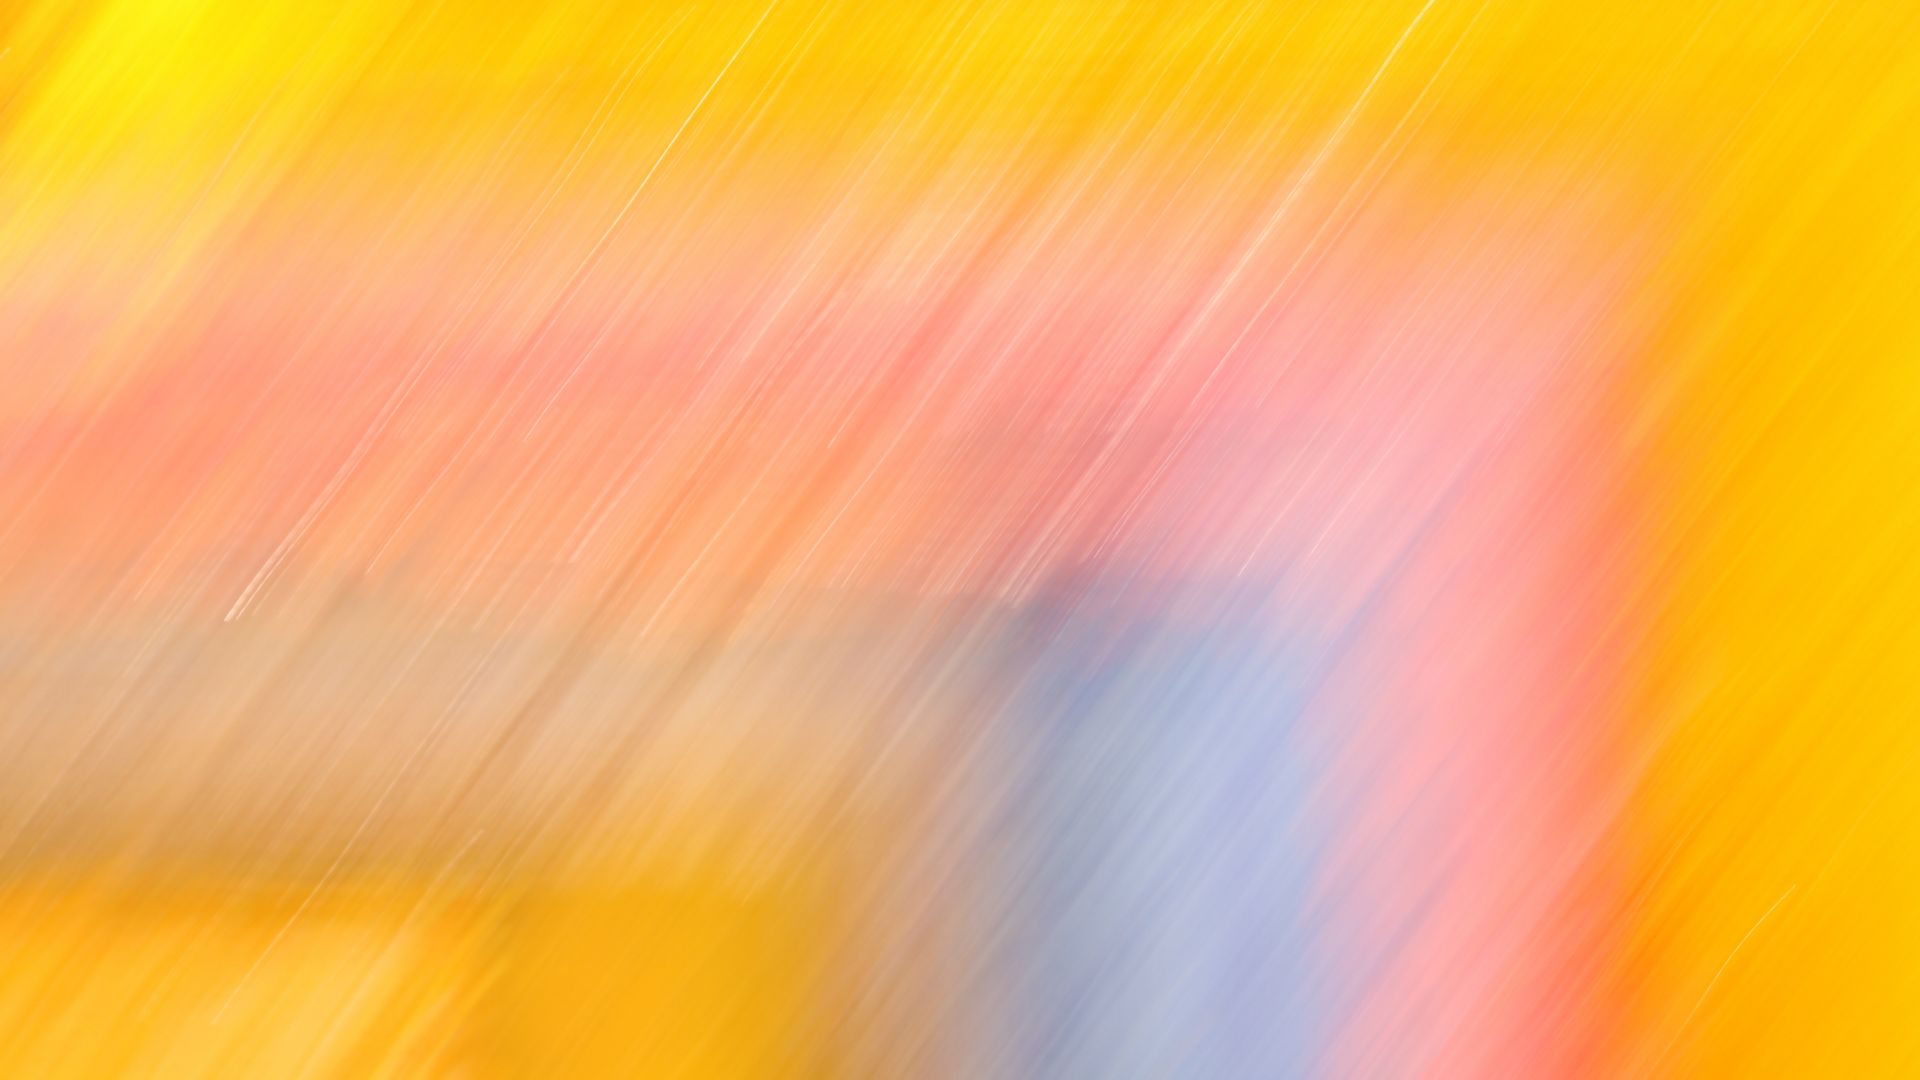 Desktop Wallpaper Yellow Bright Lines, Blur, Abstract, Lines, 4k, Hd Image,  Picture, Background, Drrvti